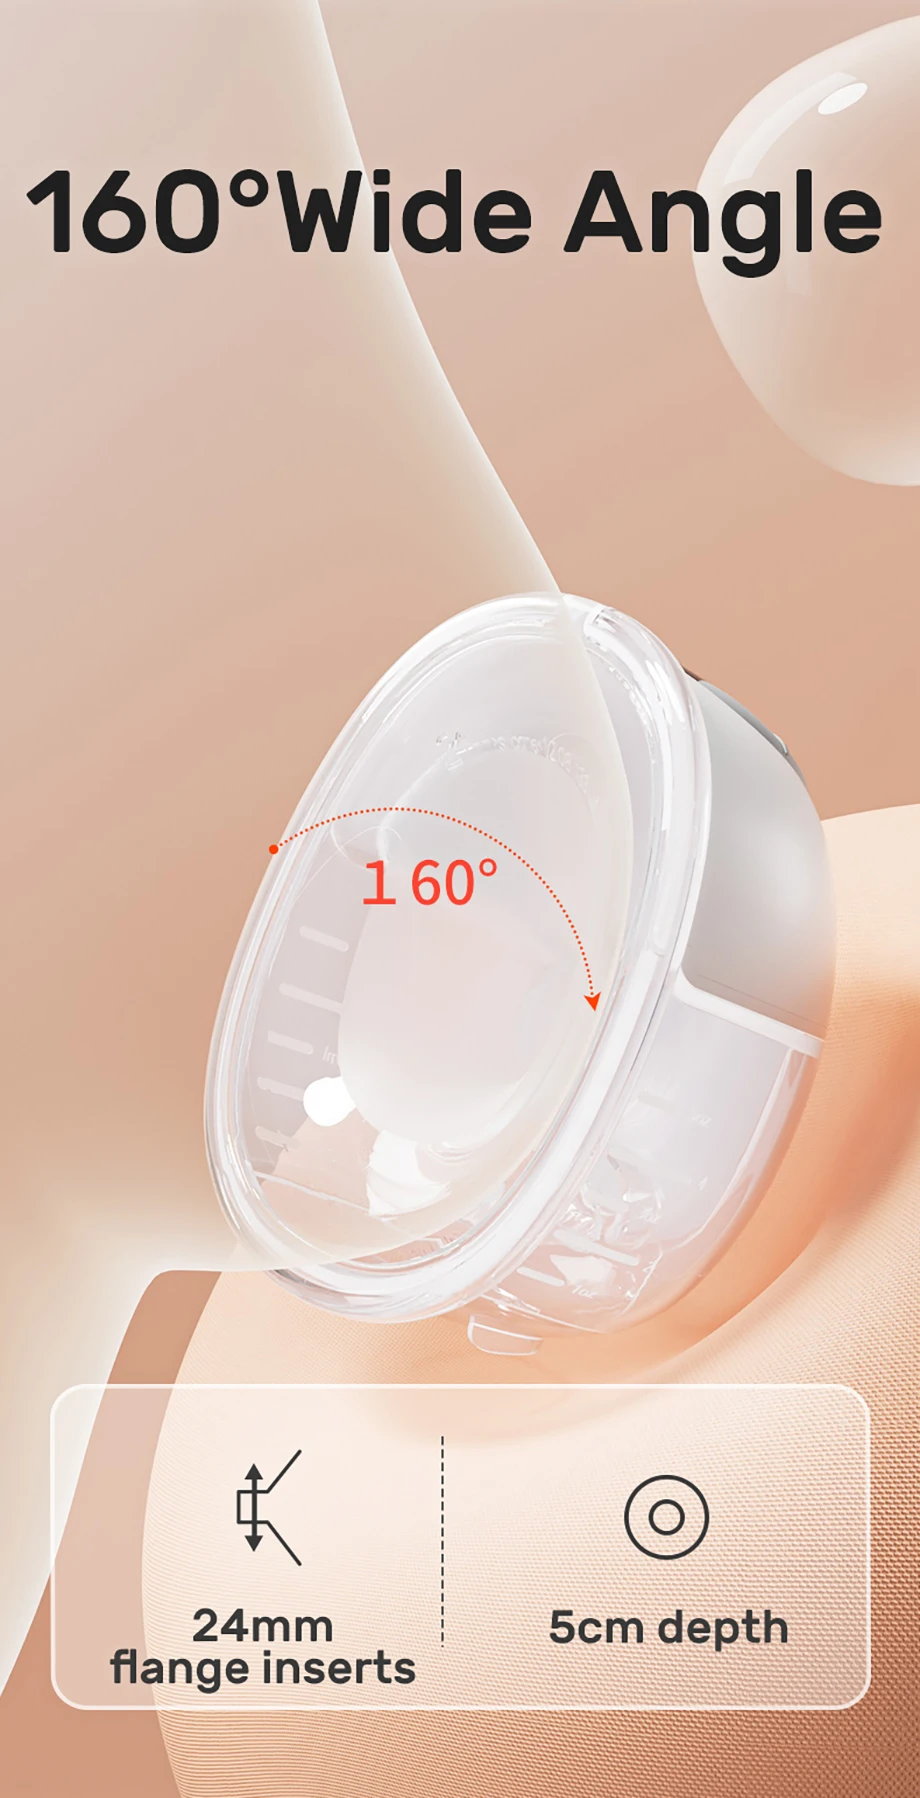 S2df105b3b57e43bf8e4f716fc616ccacr NCVI Wearable Breast Pump, Hands-Free Breast Pump with 4 Modes & 9 Levels, Portable Breast Pump, Low Noise & Discreet, 24mm